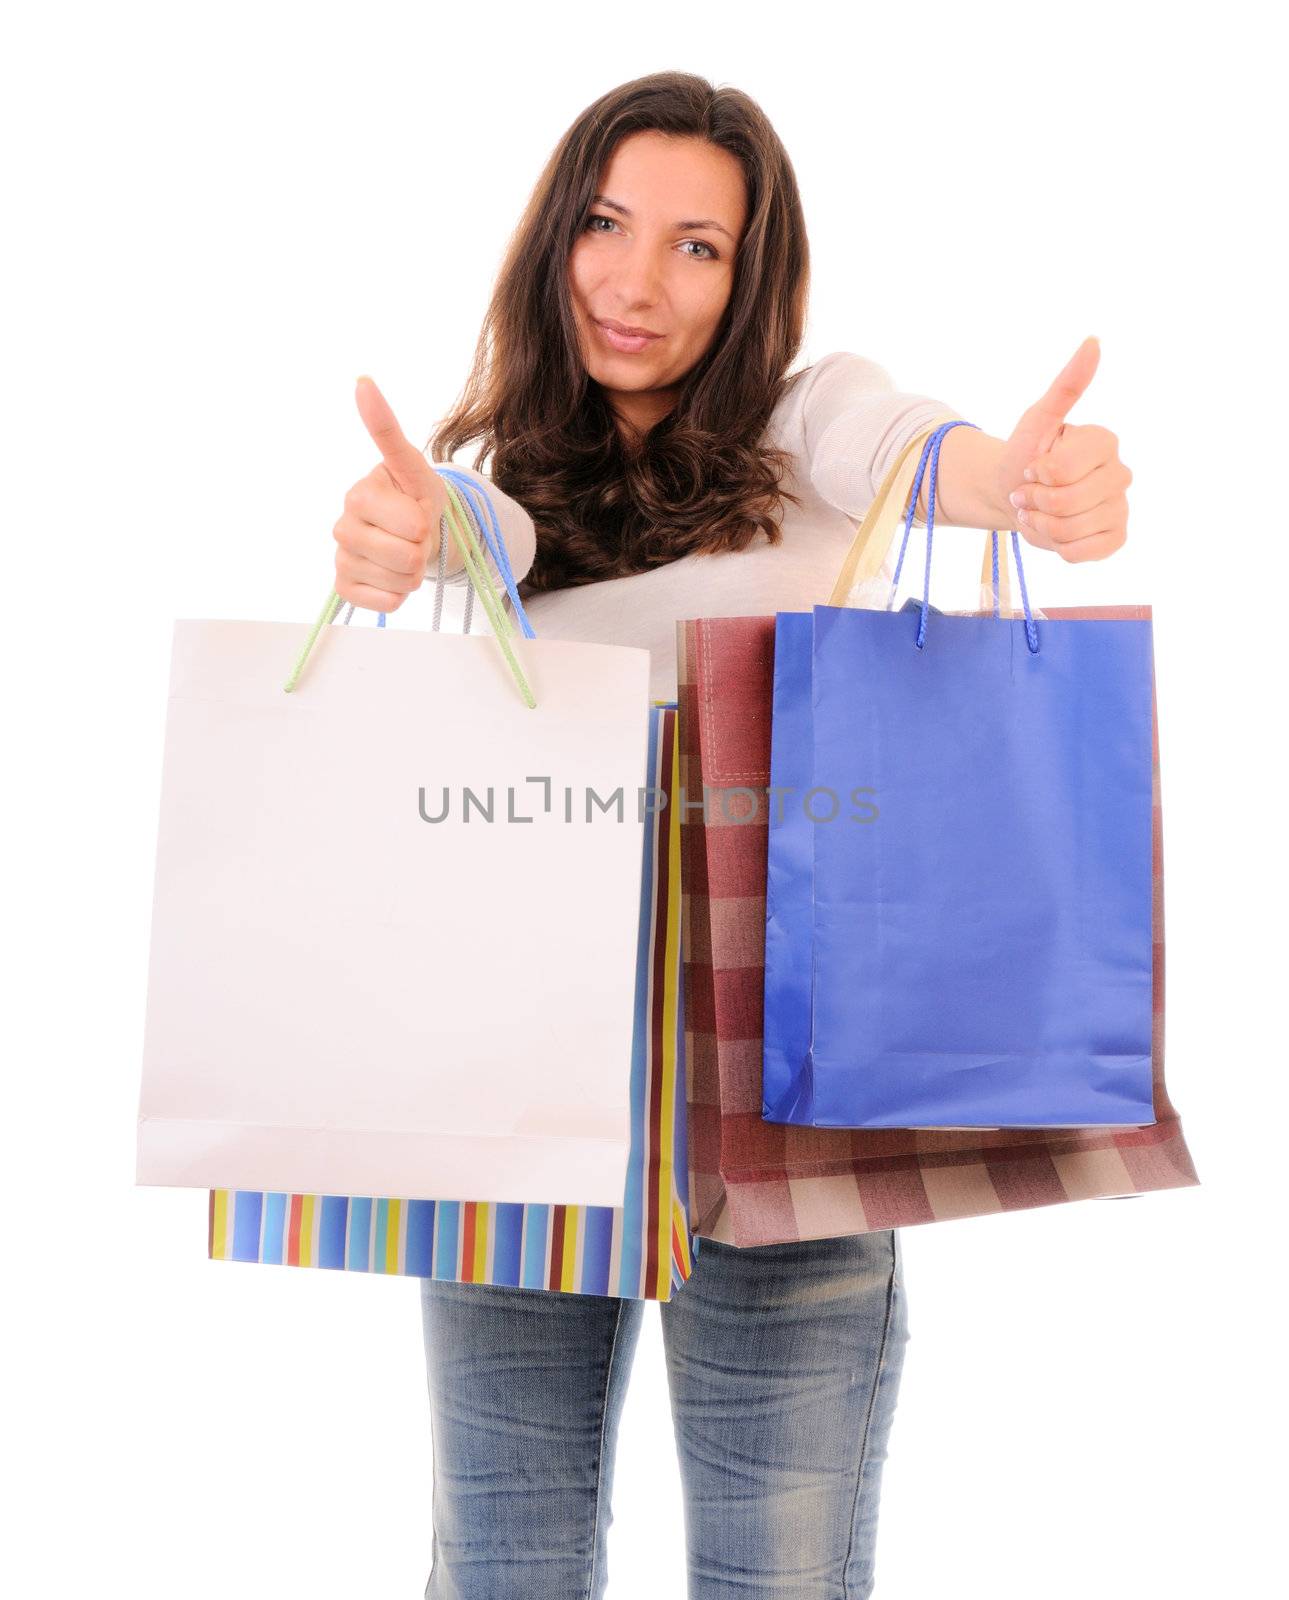 Shopping woman isolated on white